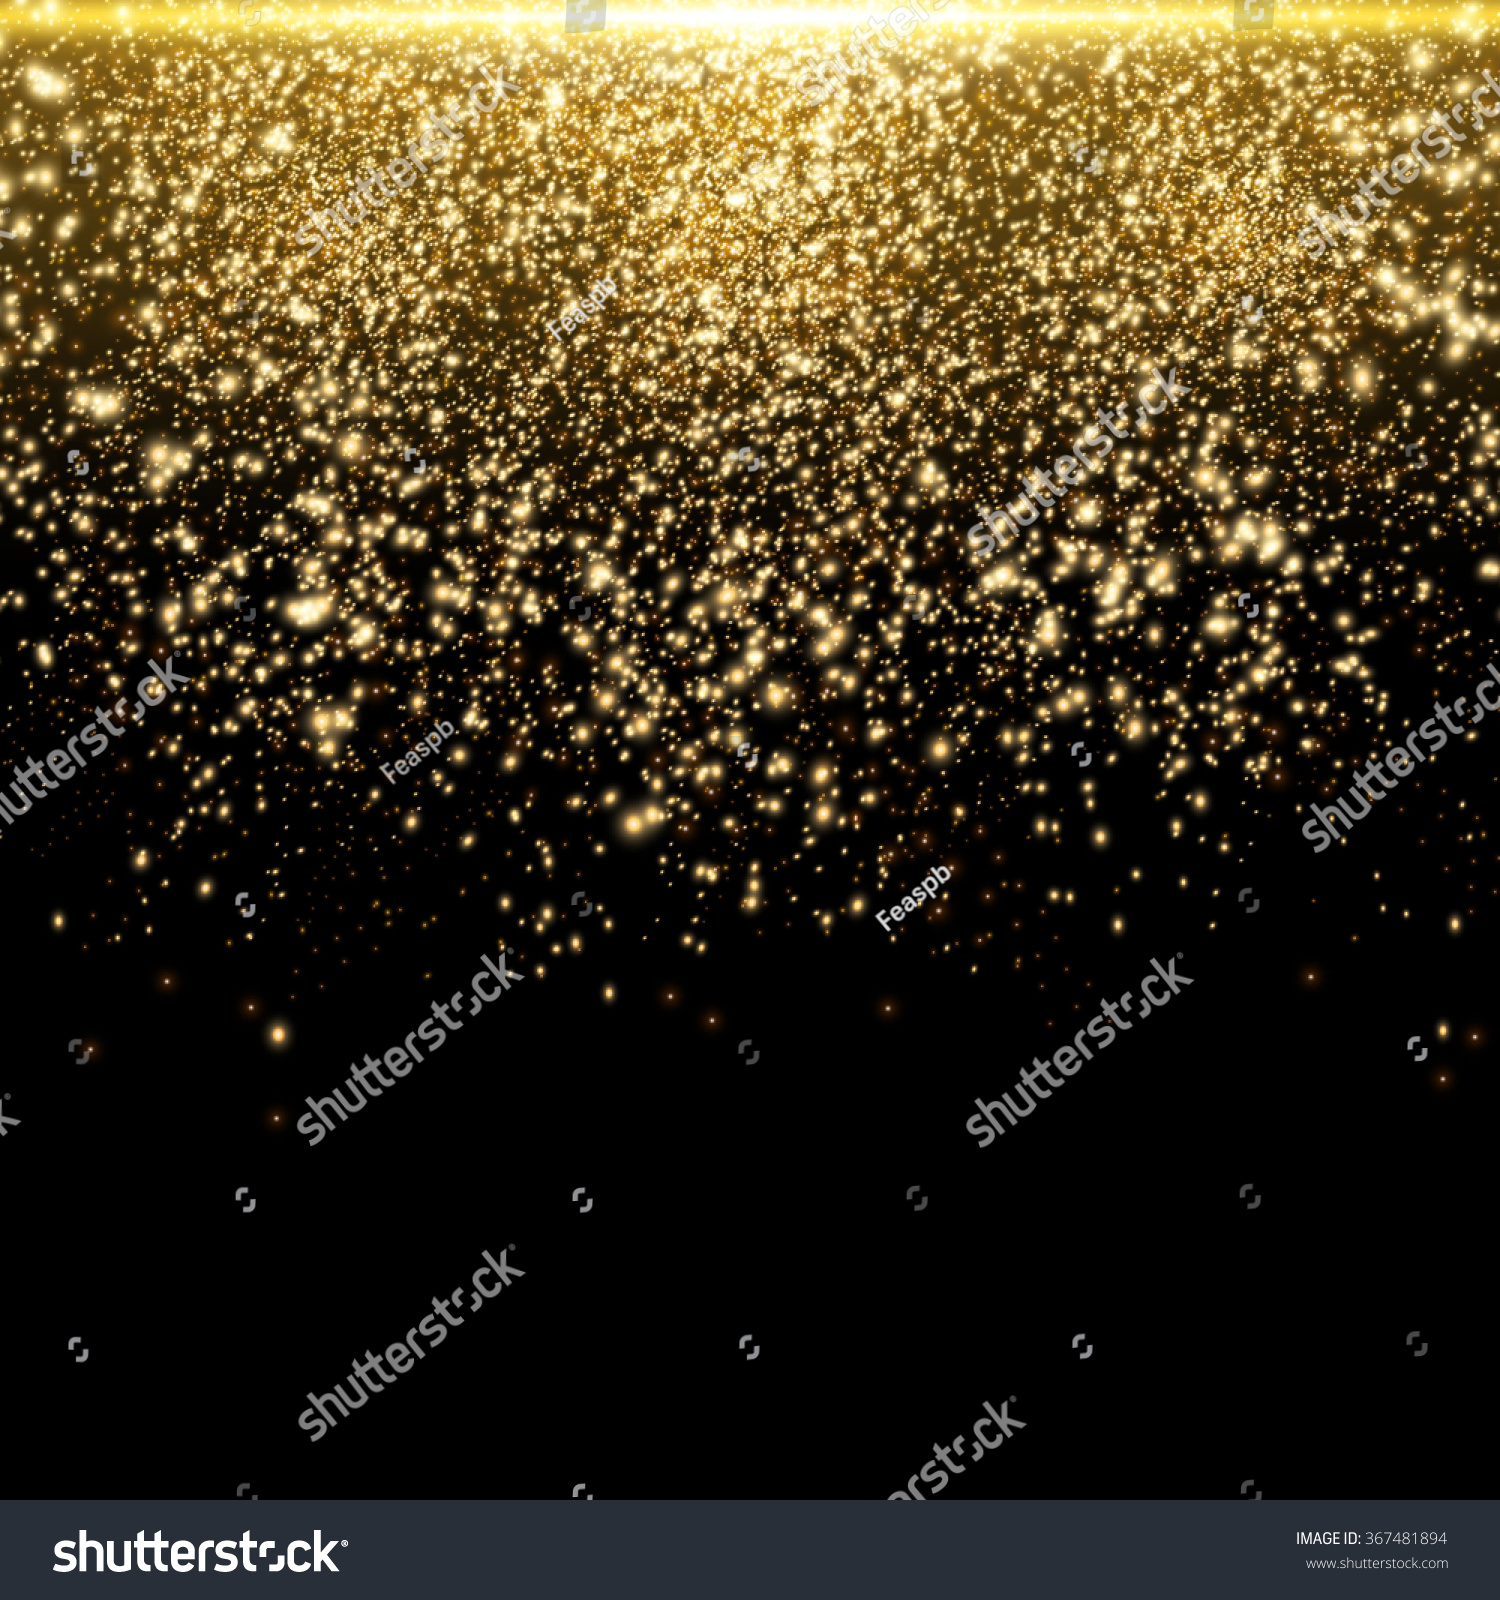 Gold Glitter Dust Texture.Gold Particles. Luxury - Royalty Free Stock ...